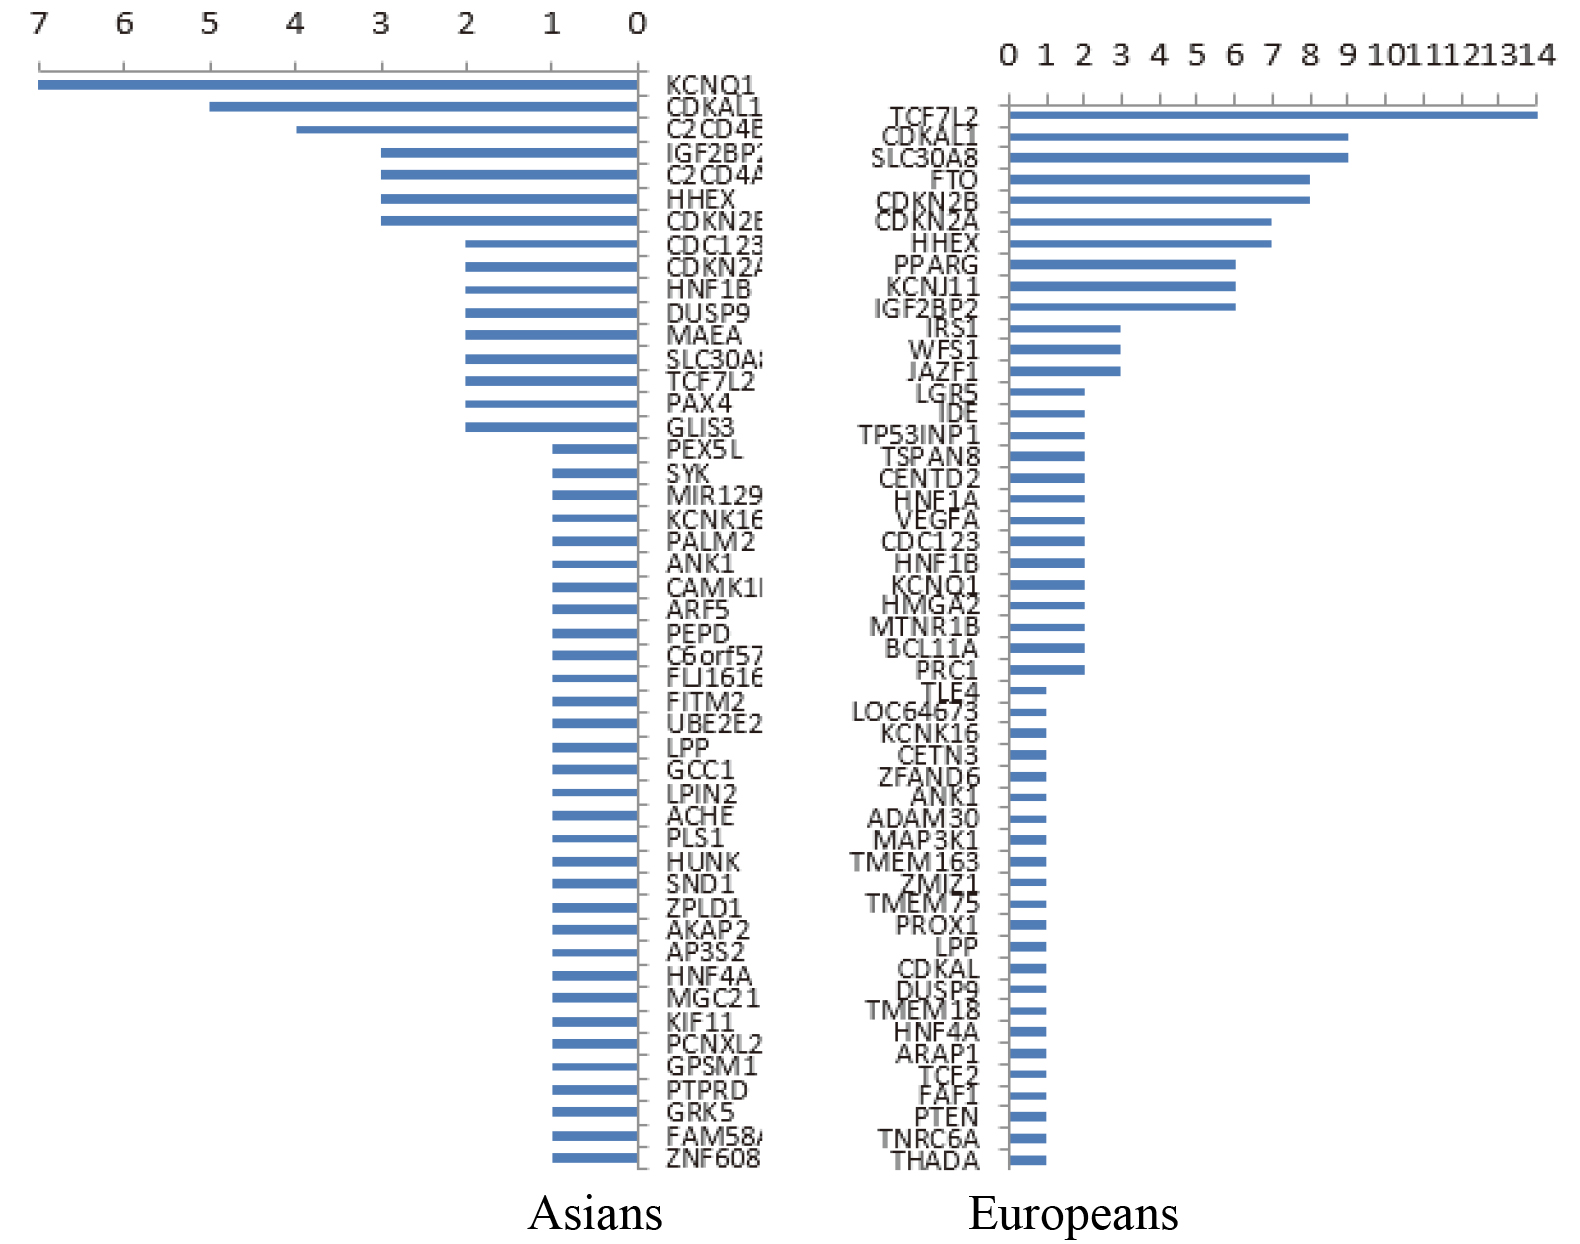 Reported frequency of susceptibility genes among Asians (left) and Europeans (right).